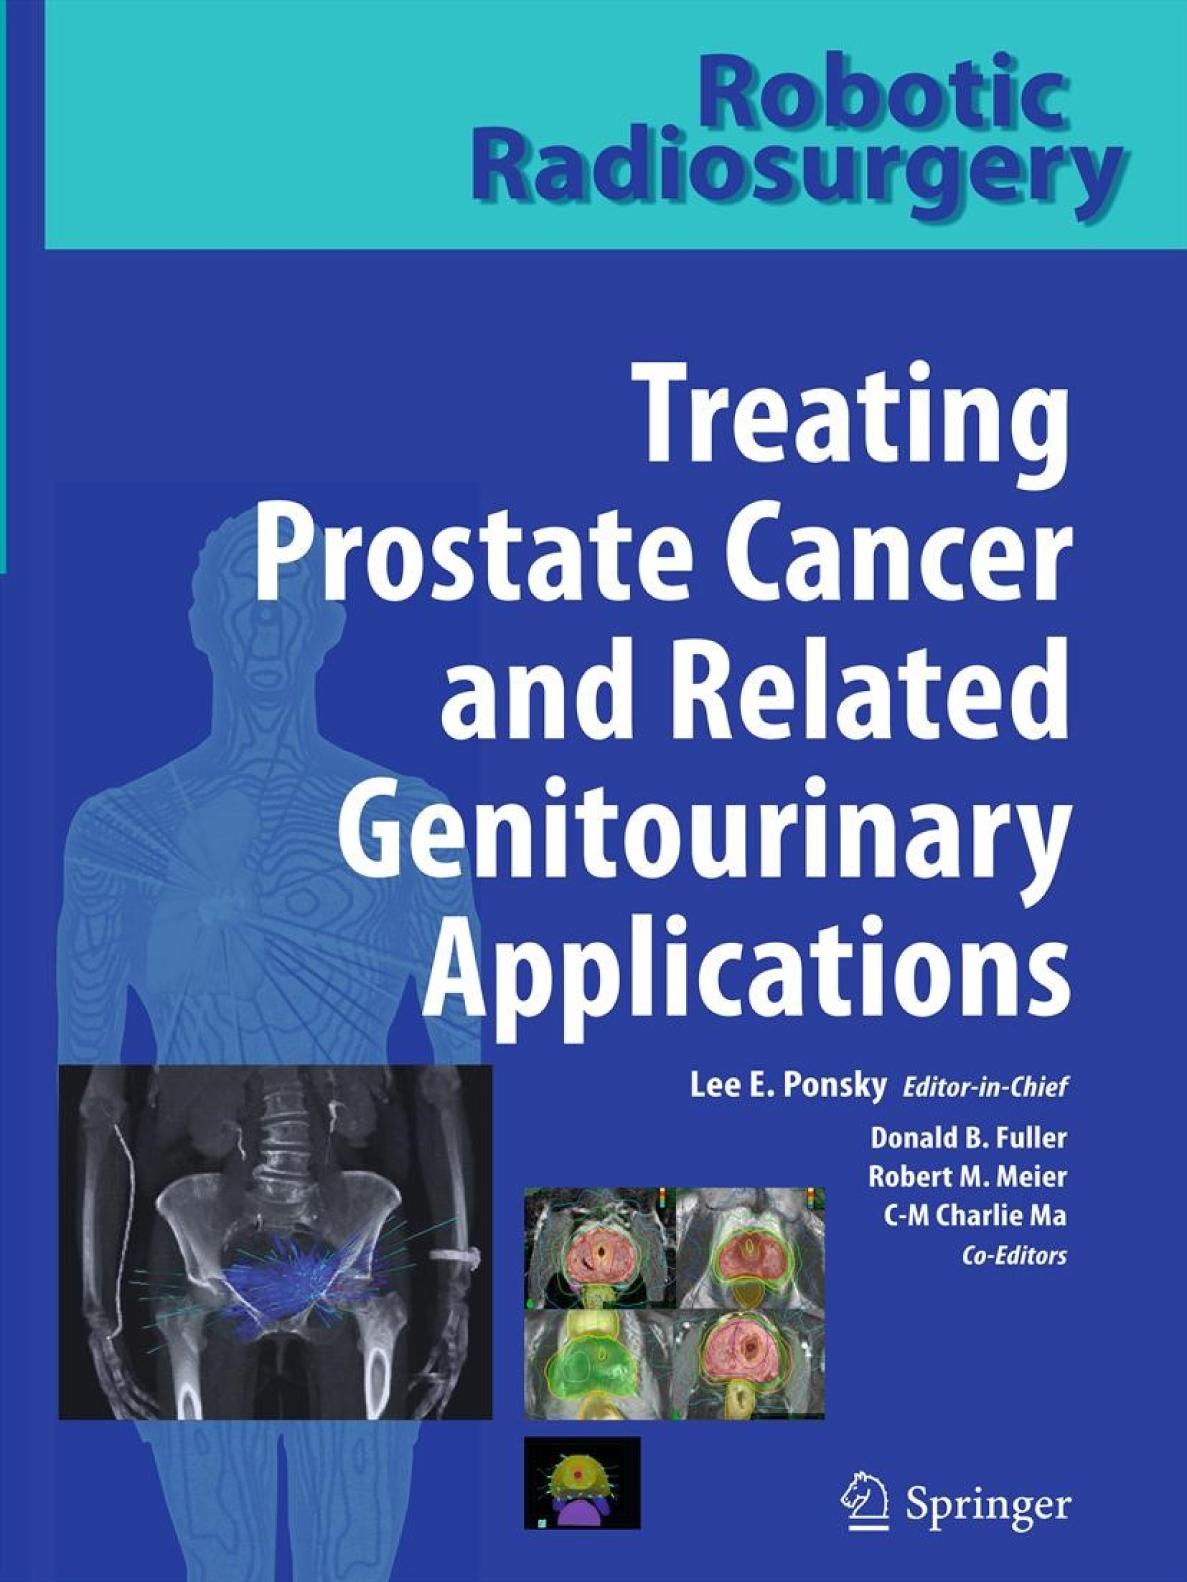 Robotic Radiosurgery. Treating Prostate Cancer and Related Genitourinary Applications